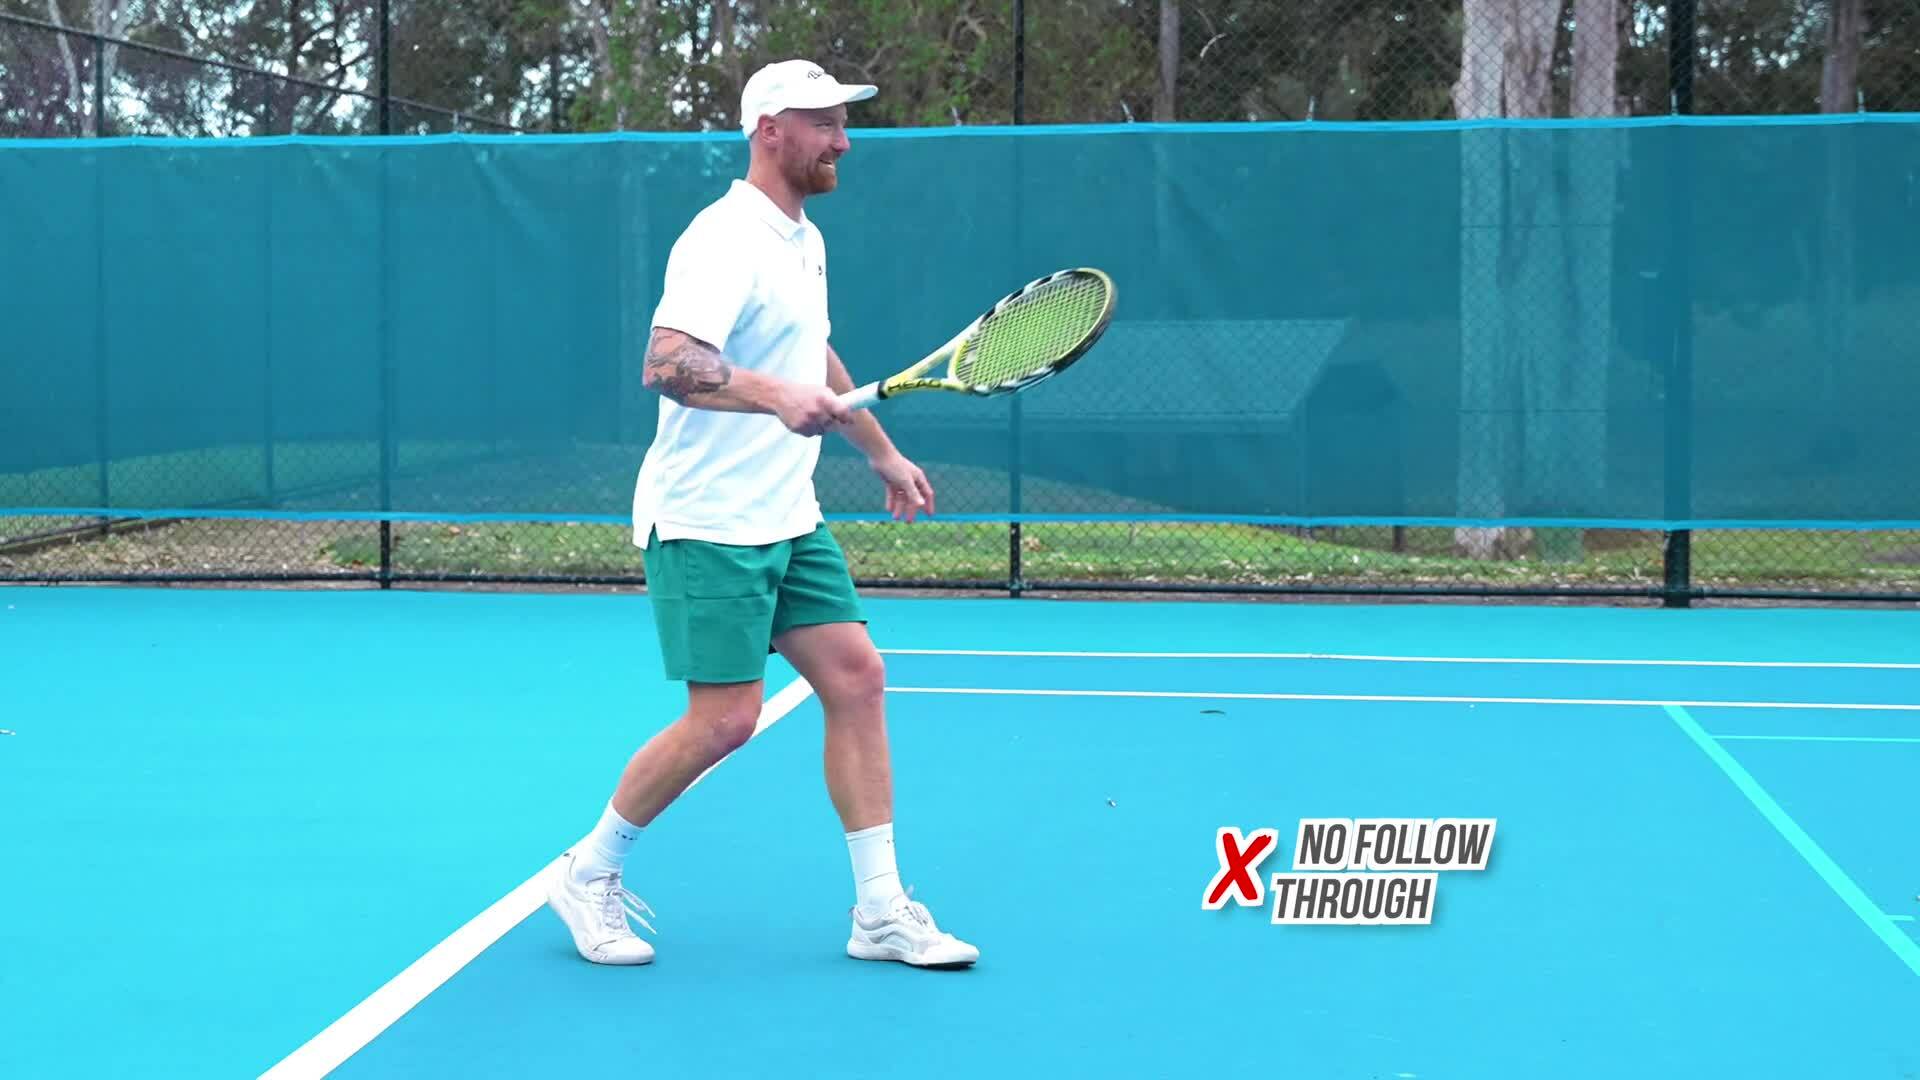 Learn to play tennis: The fundamentals